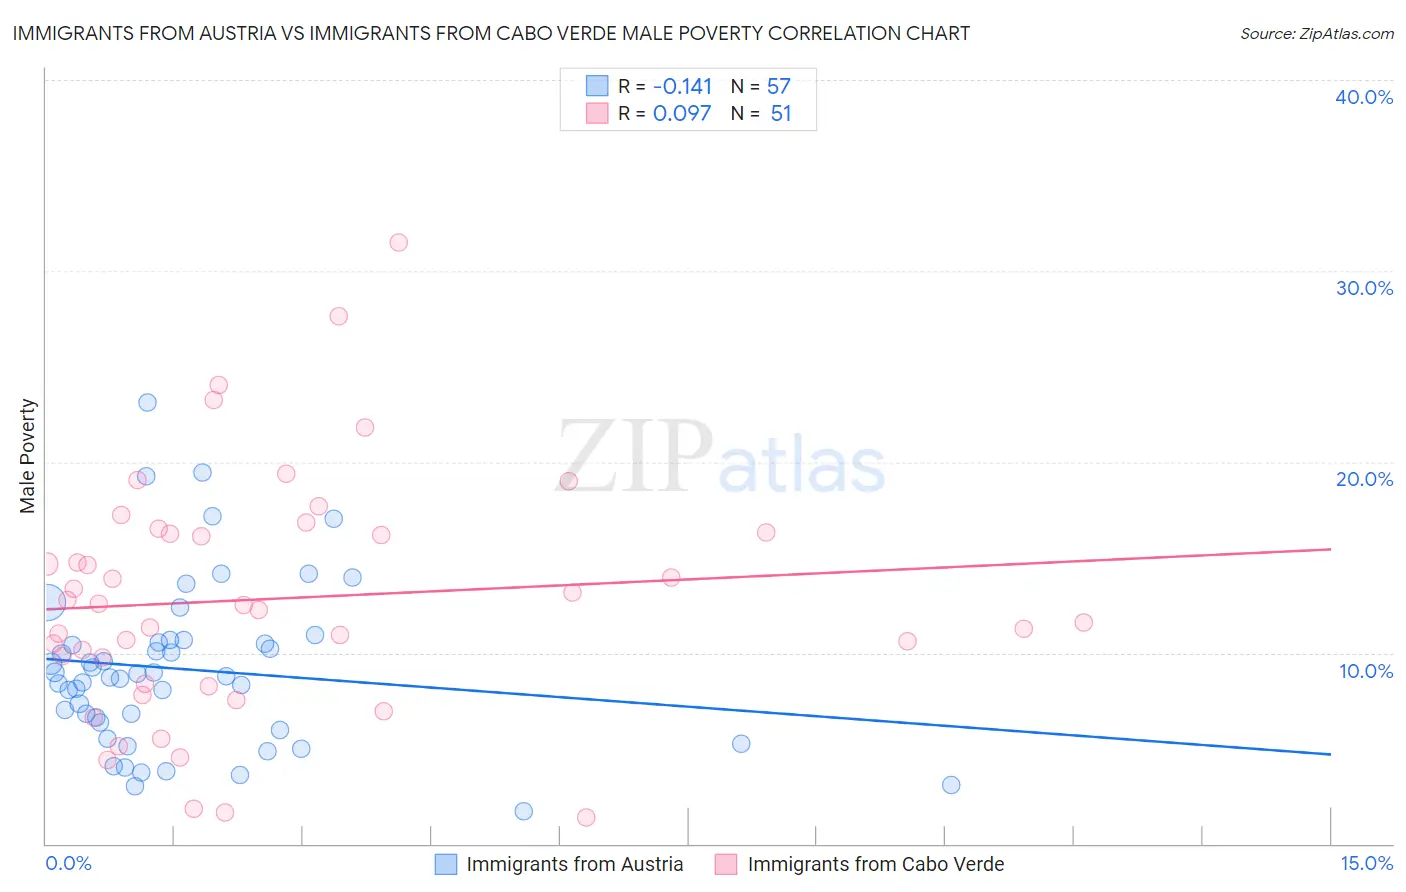 Immigrants from Austria vs Immigrants from Cabo Verde Male Poverty